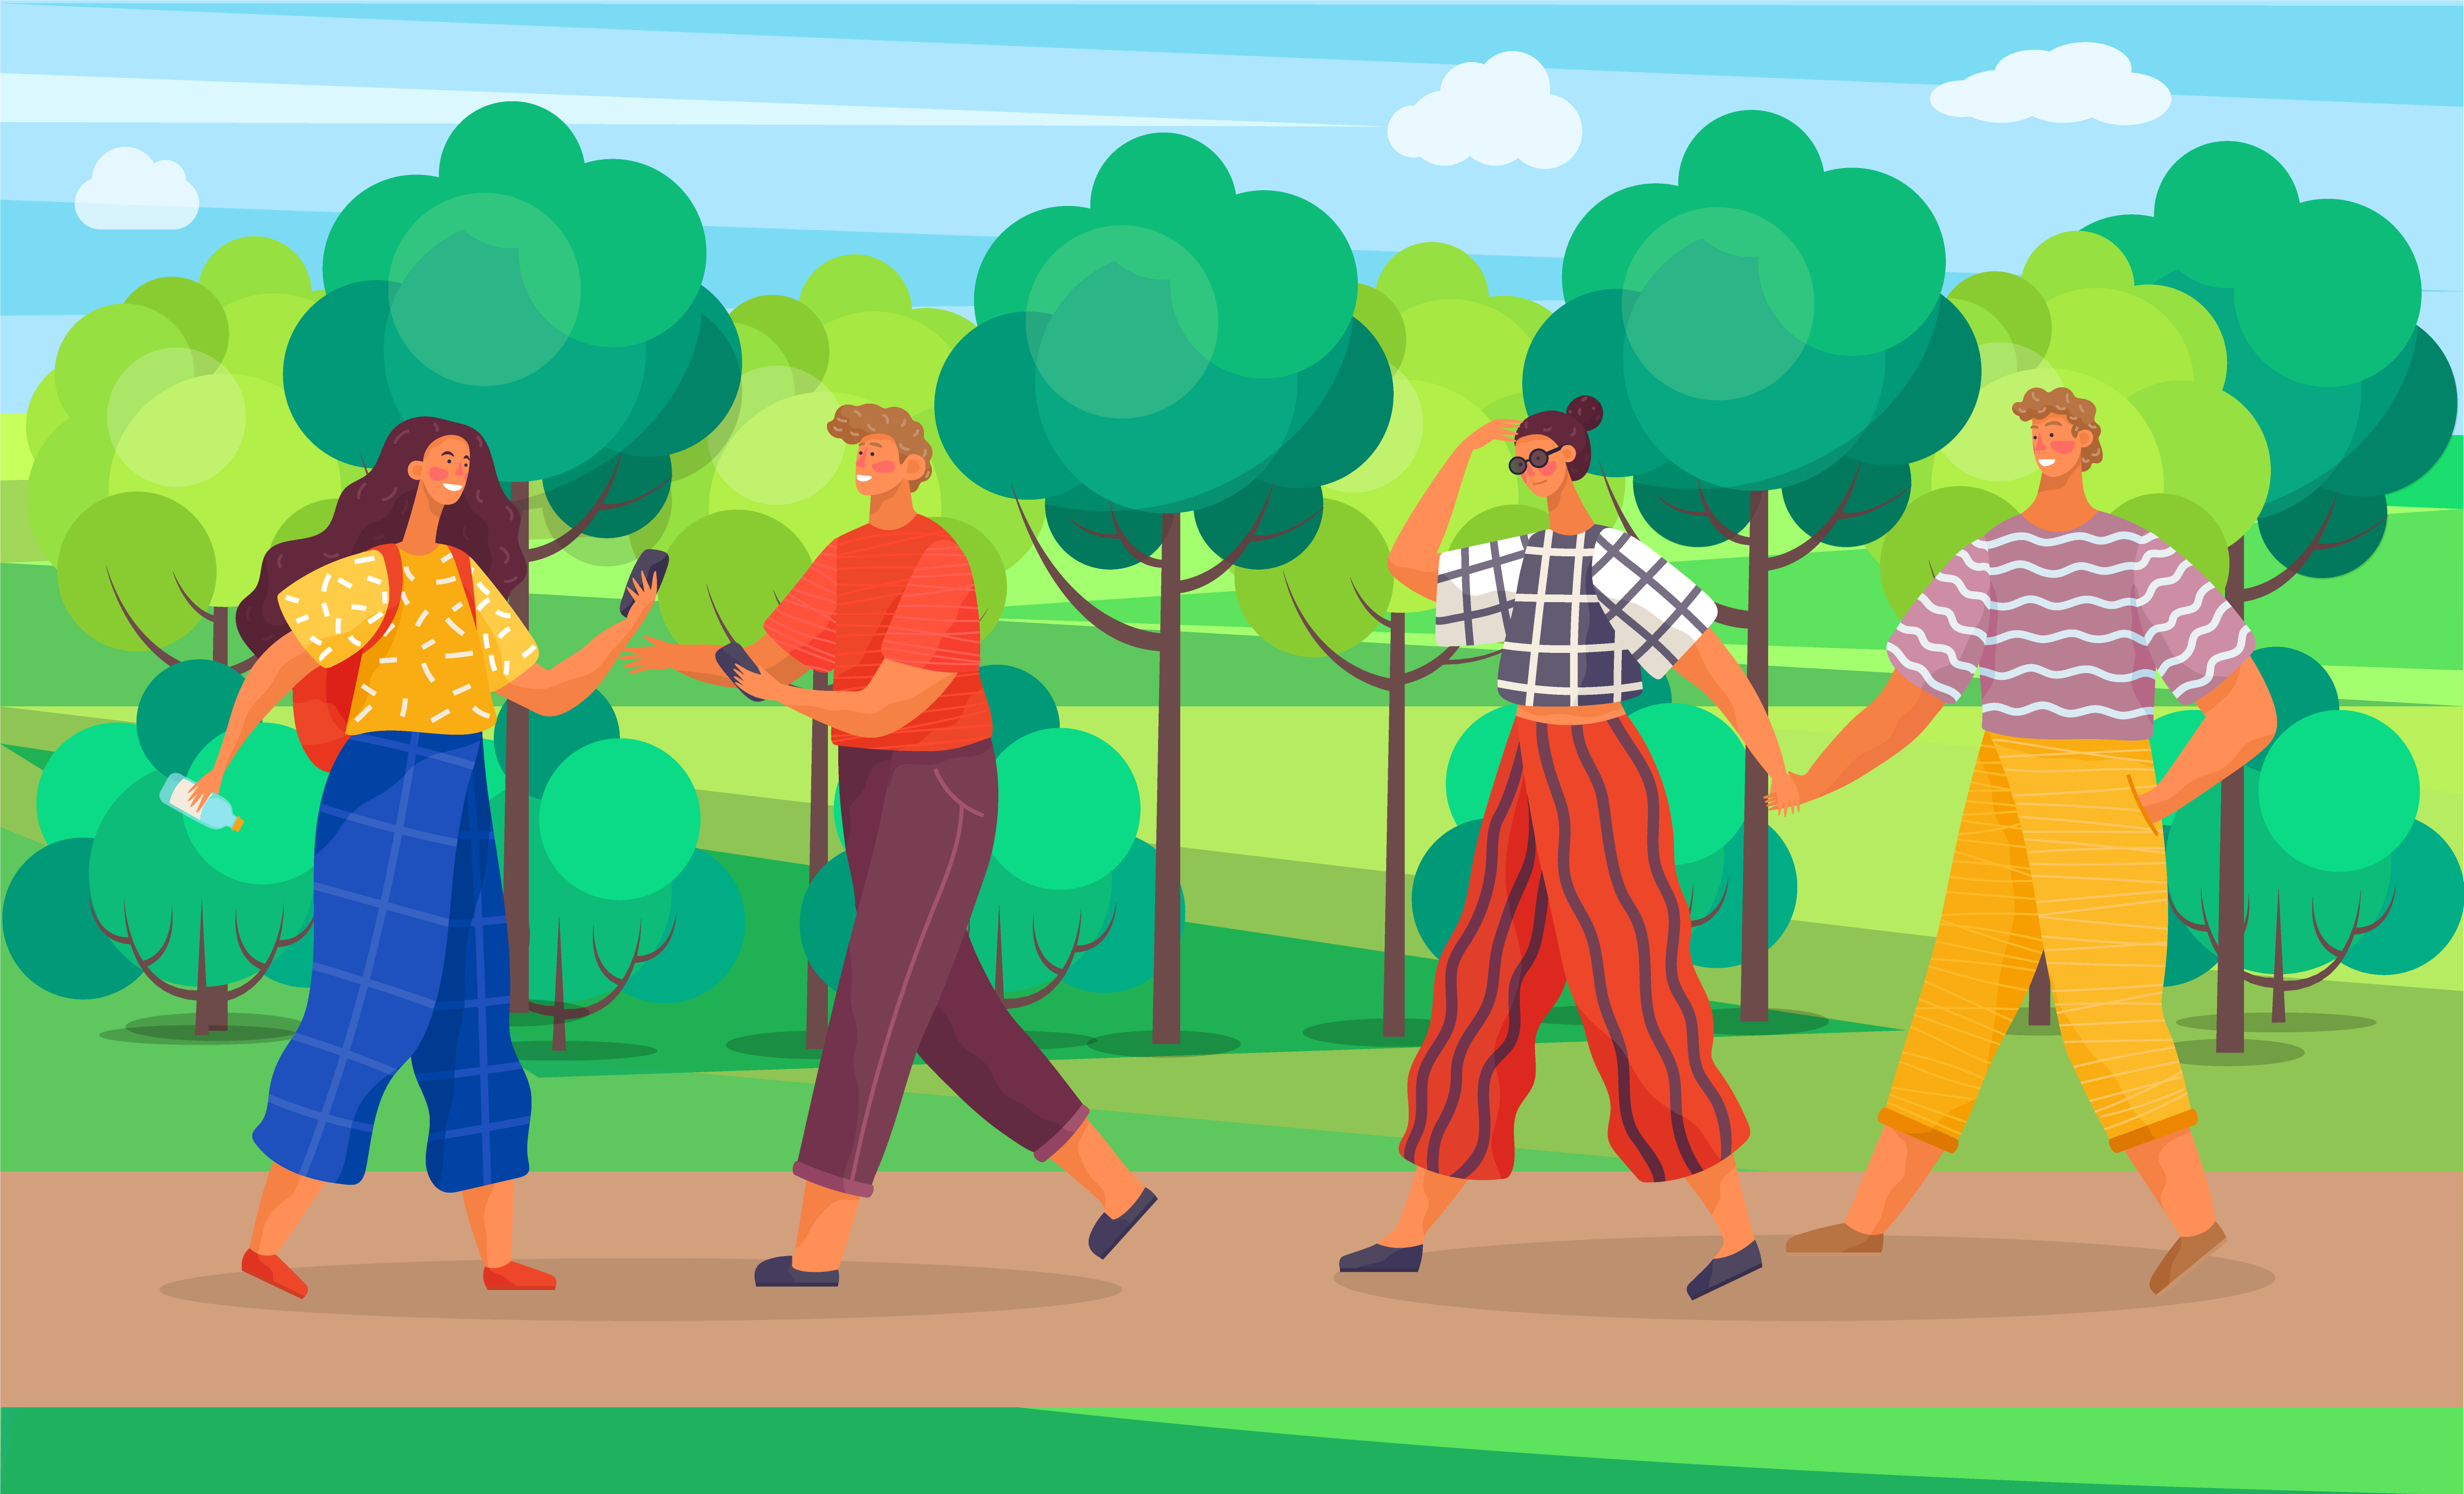 People spend leisure time in park or forest. Teenagers talking on pathway, friends meeting. Man and woman walk holding hands. Landscape with green trees, sunny summer day. Vector illustration in flat. People Walk in Park or Lawn, Summer Sunny Weather